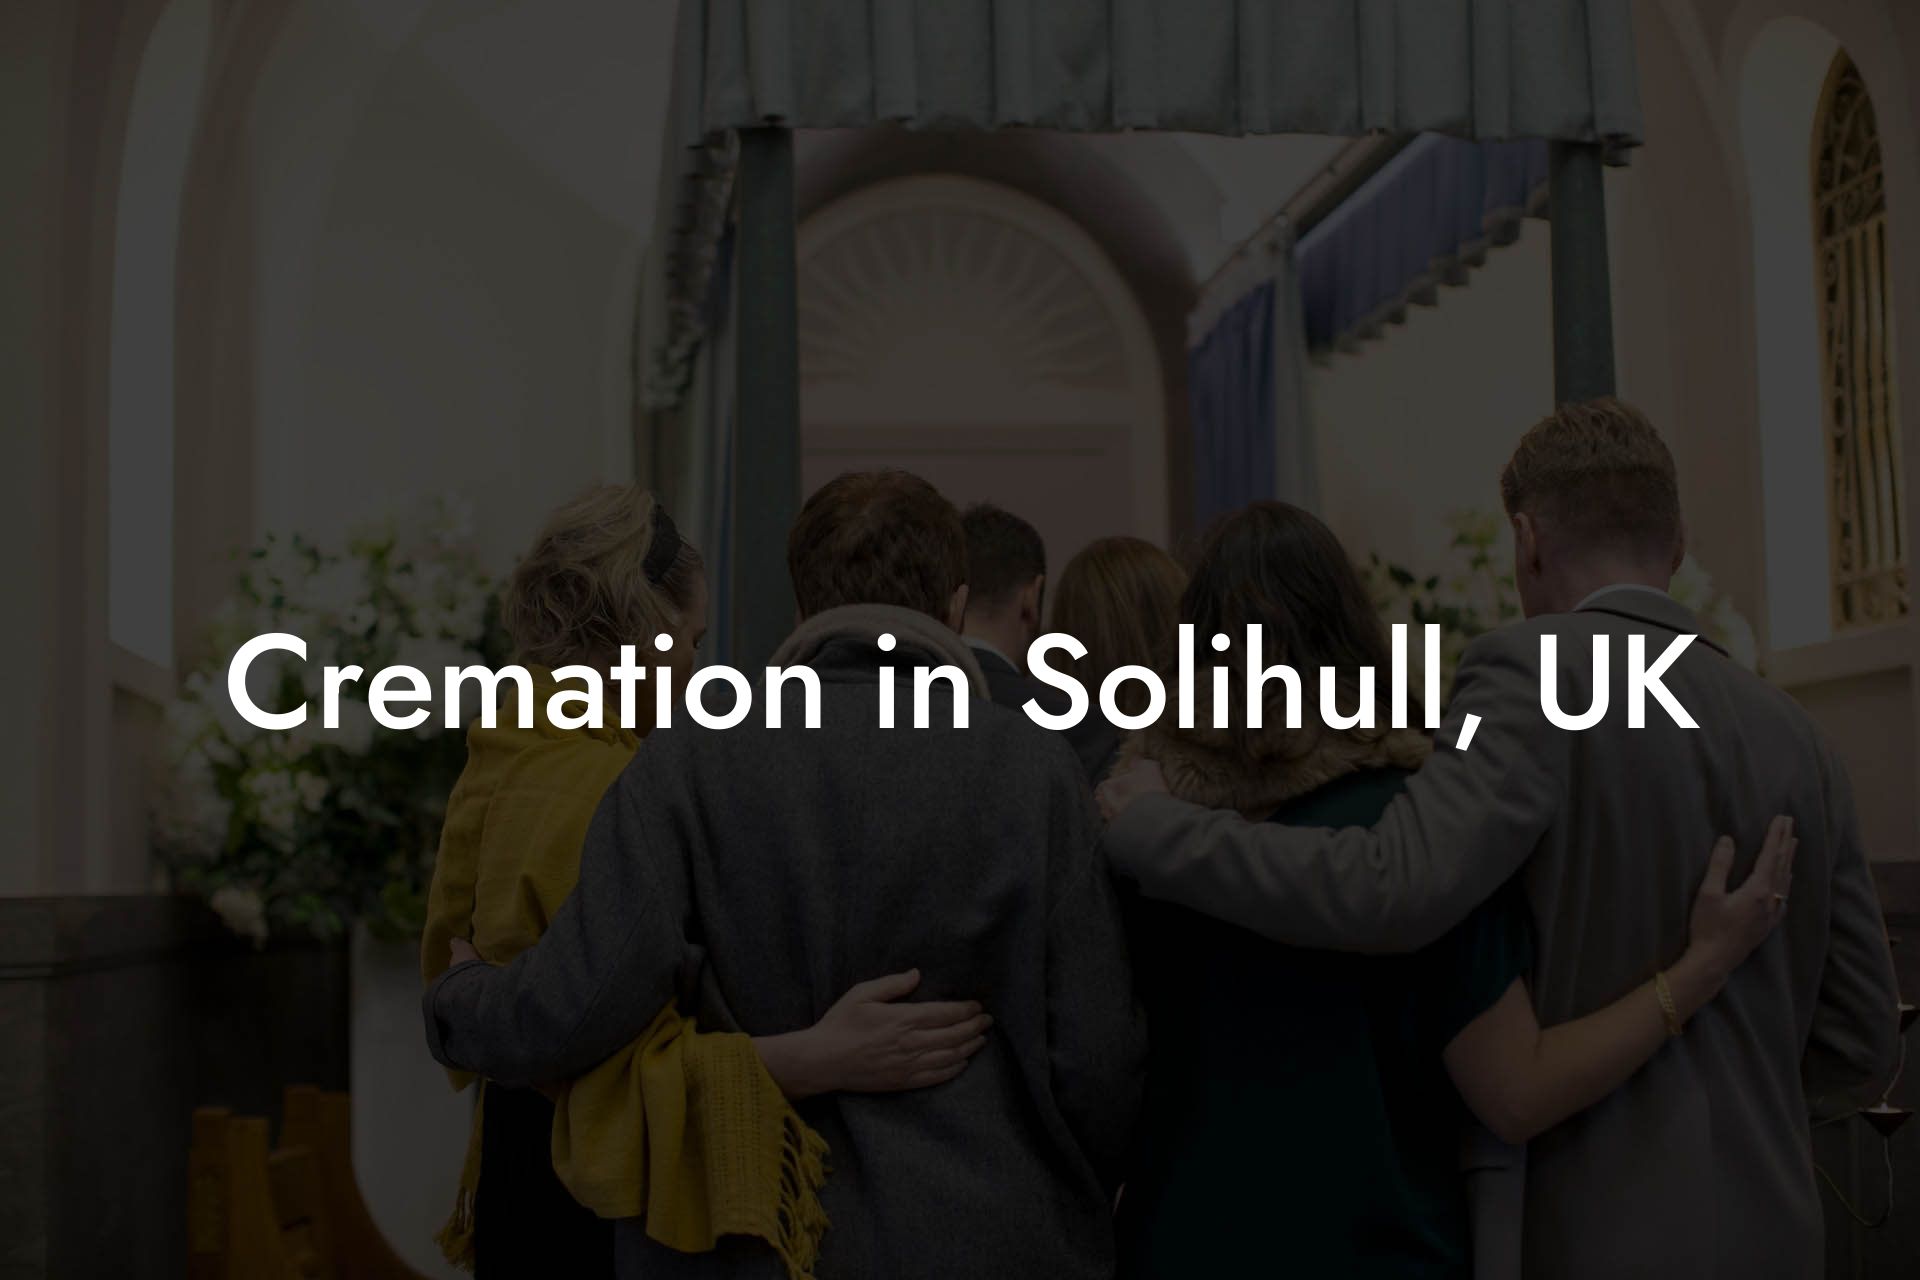 Cremation in Solihull, UK